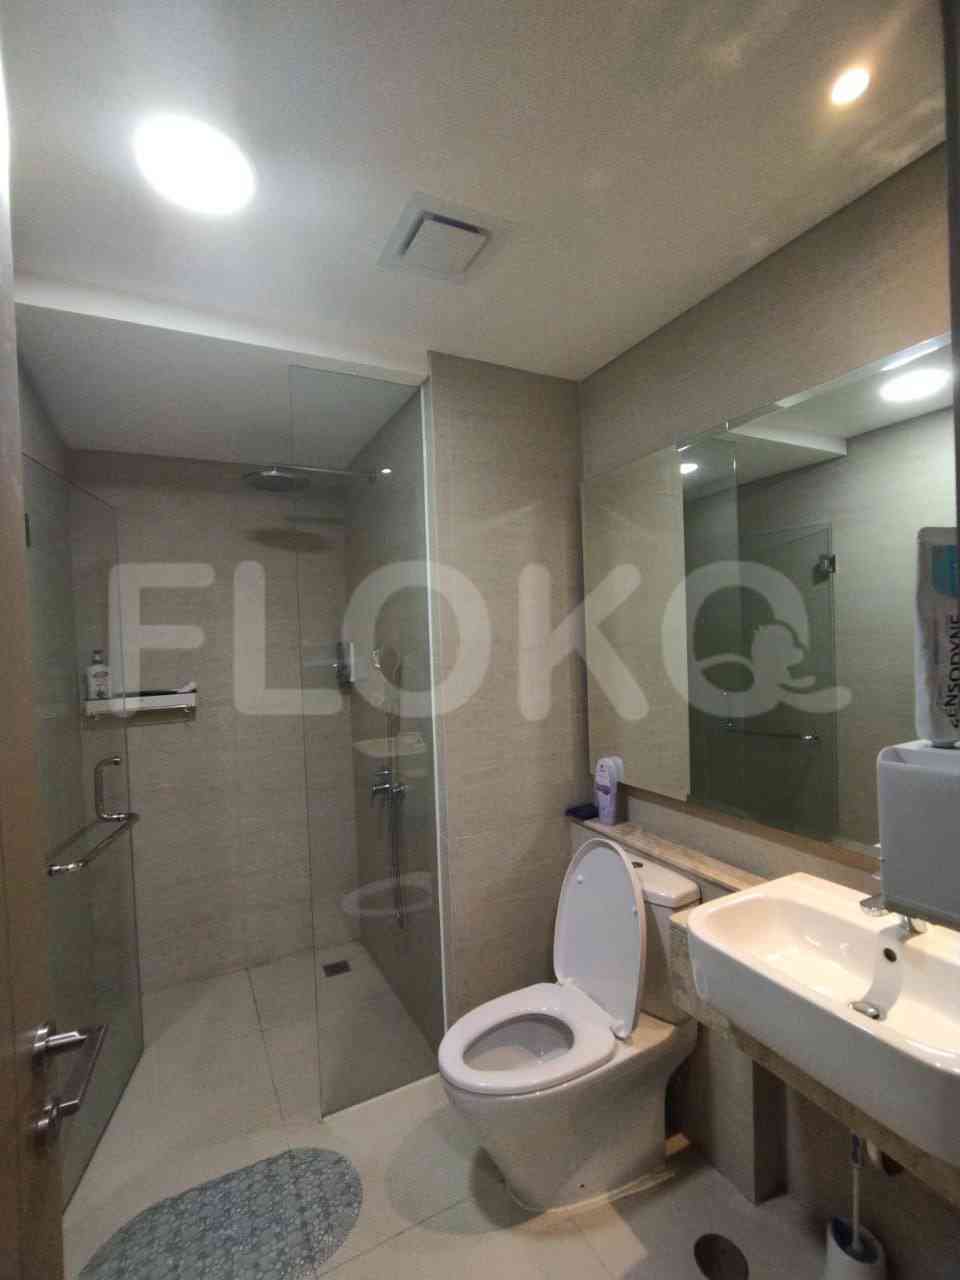 3 Bedroom on 25th Floor for Rent in Gold Coast Apartment - fka8f3 7